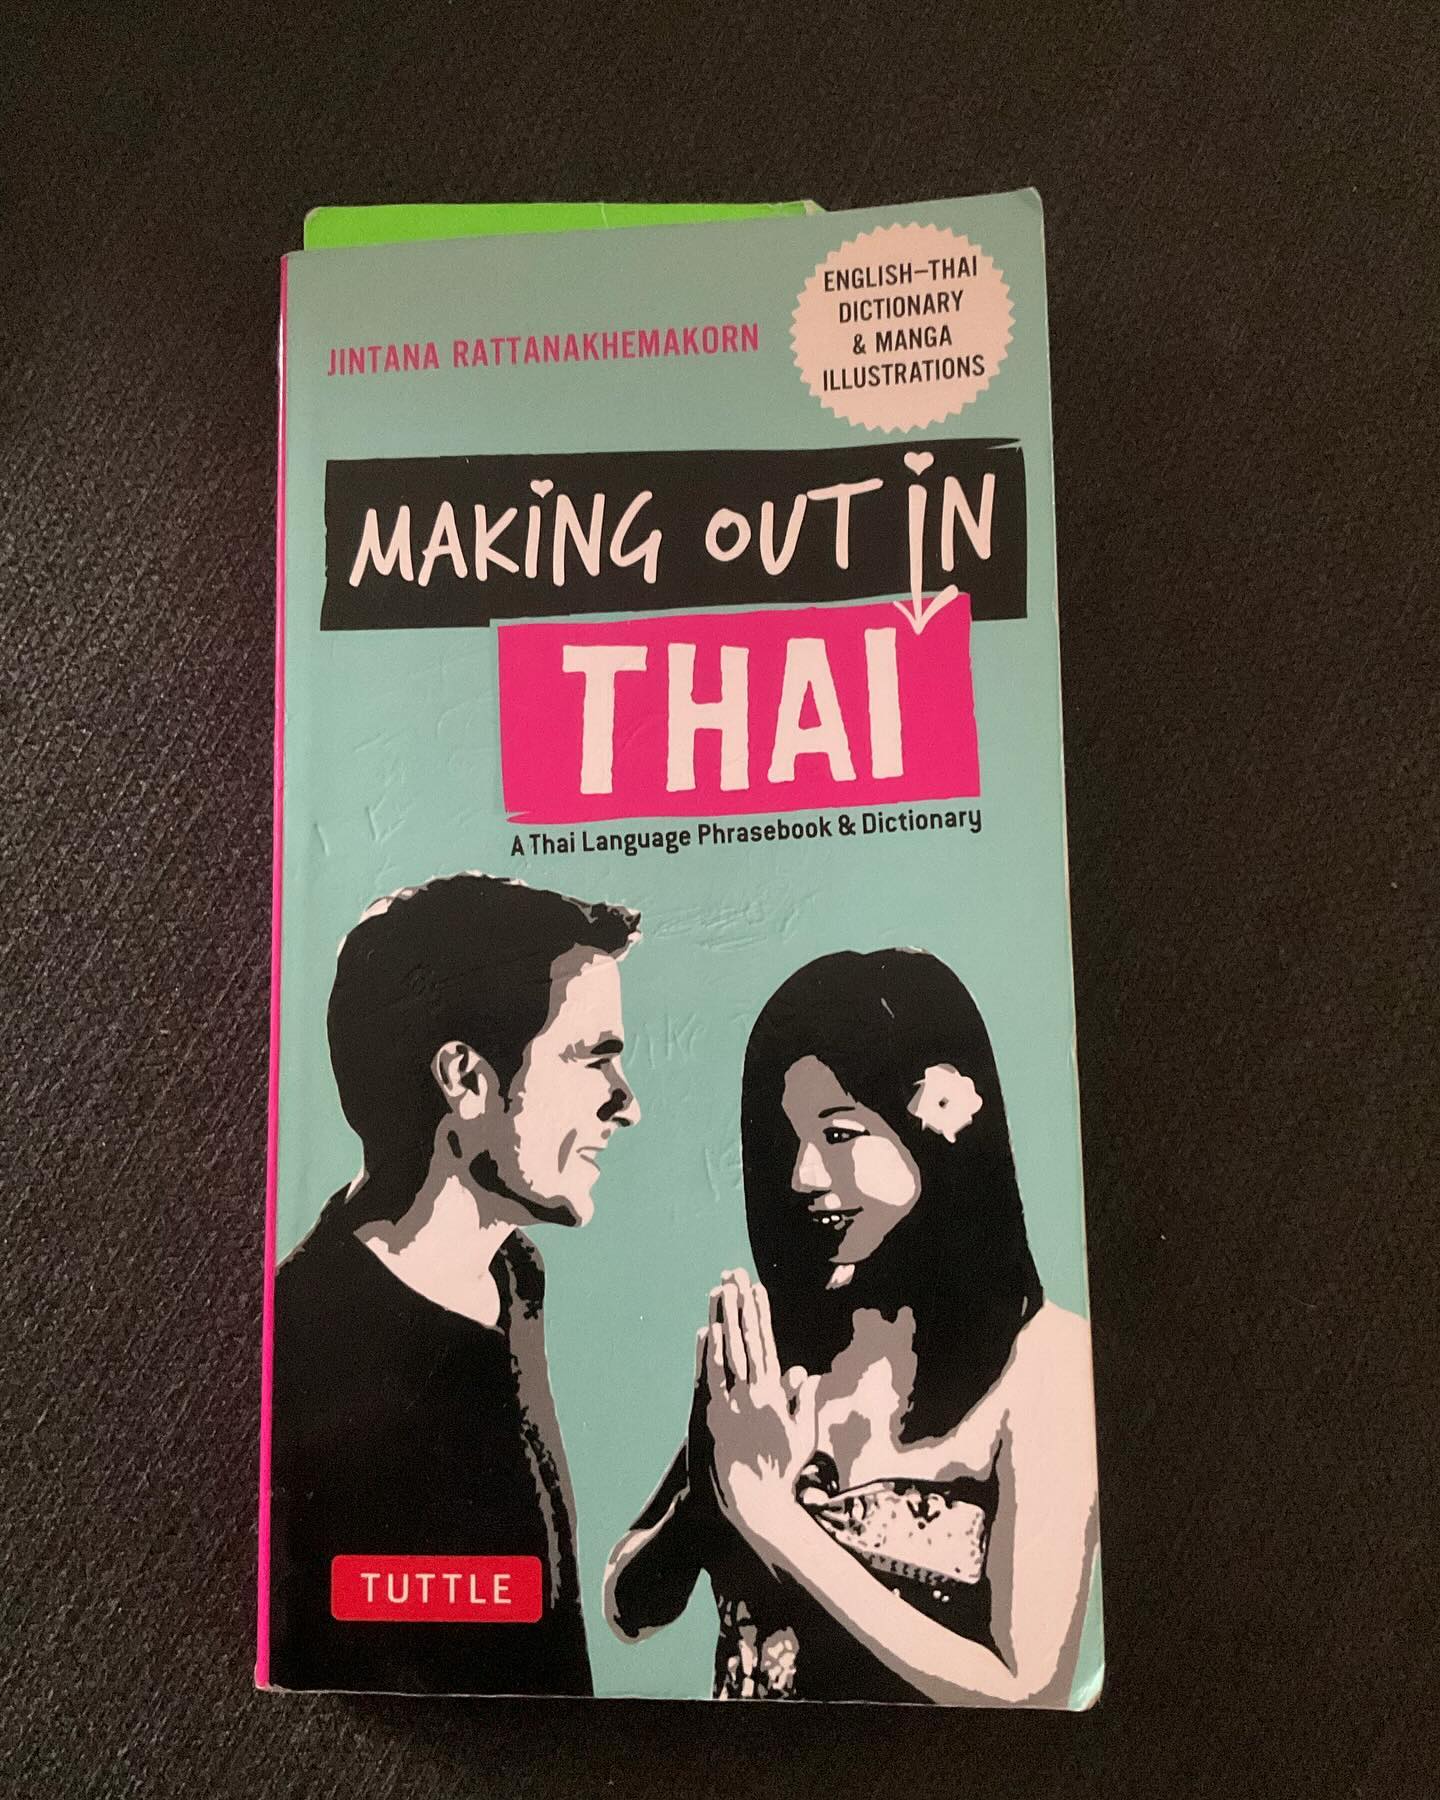 Just finished my 6th Thai Language Book on the road to fluency! 📚 Highly recommend for intermediate learners—packed with common phrases for everyday conversations. Ready for the next challenge! 
#LanguageLearning #Thai #speakingthai